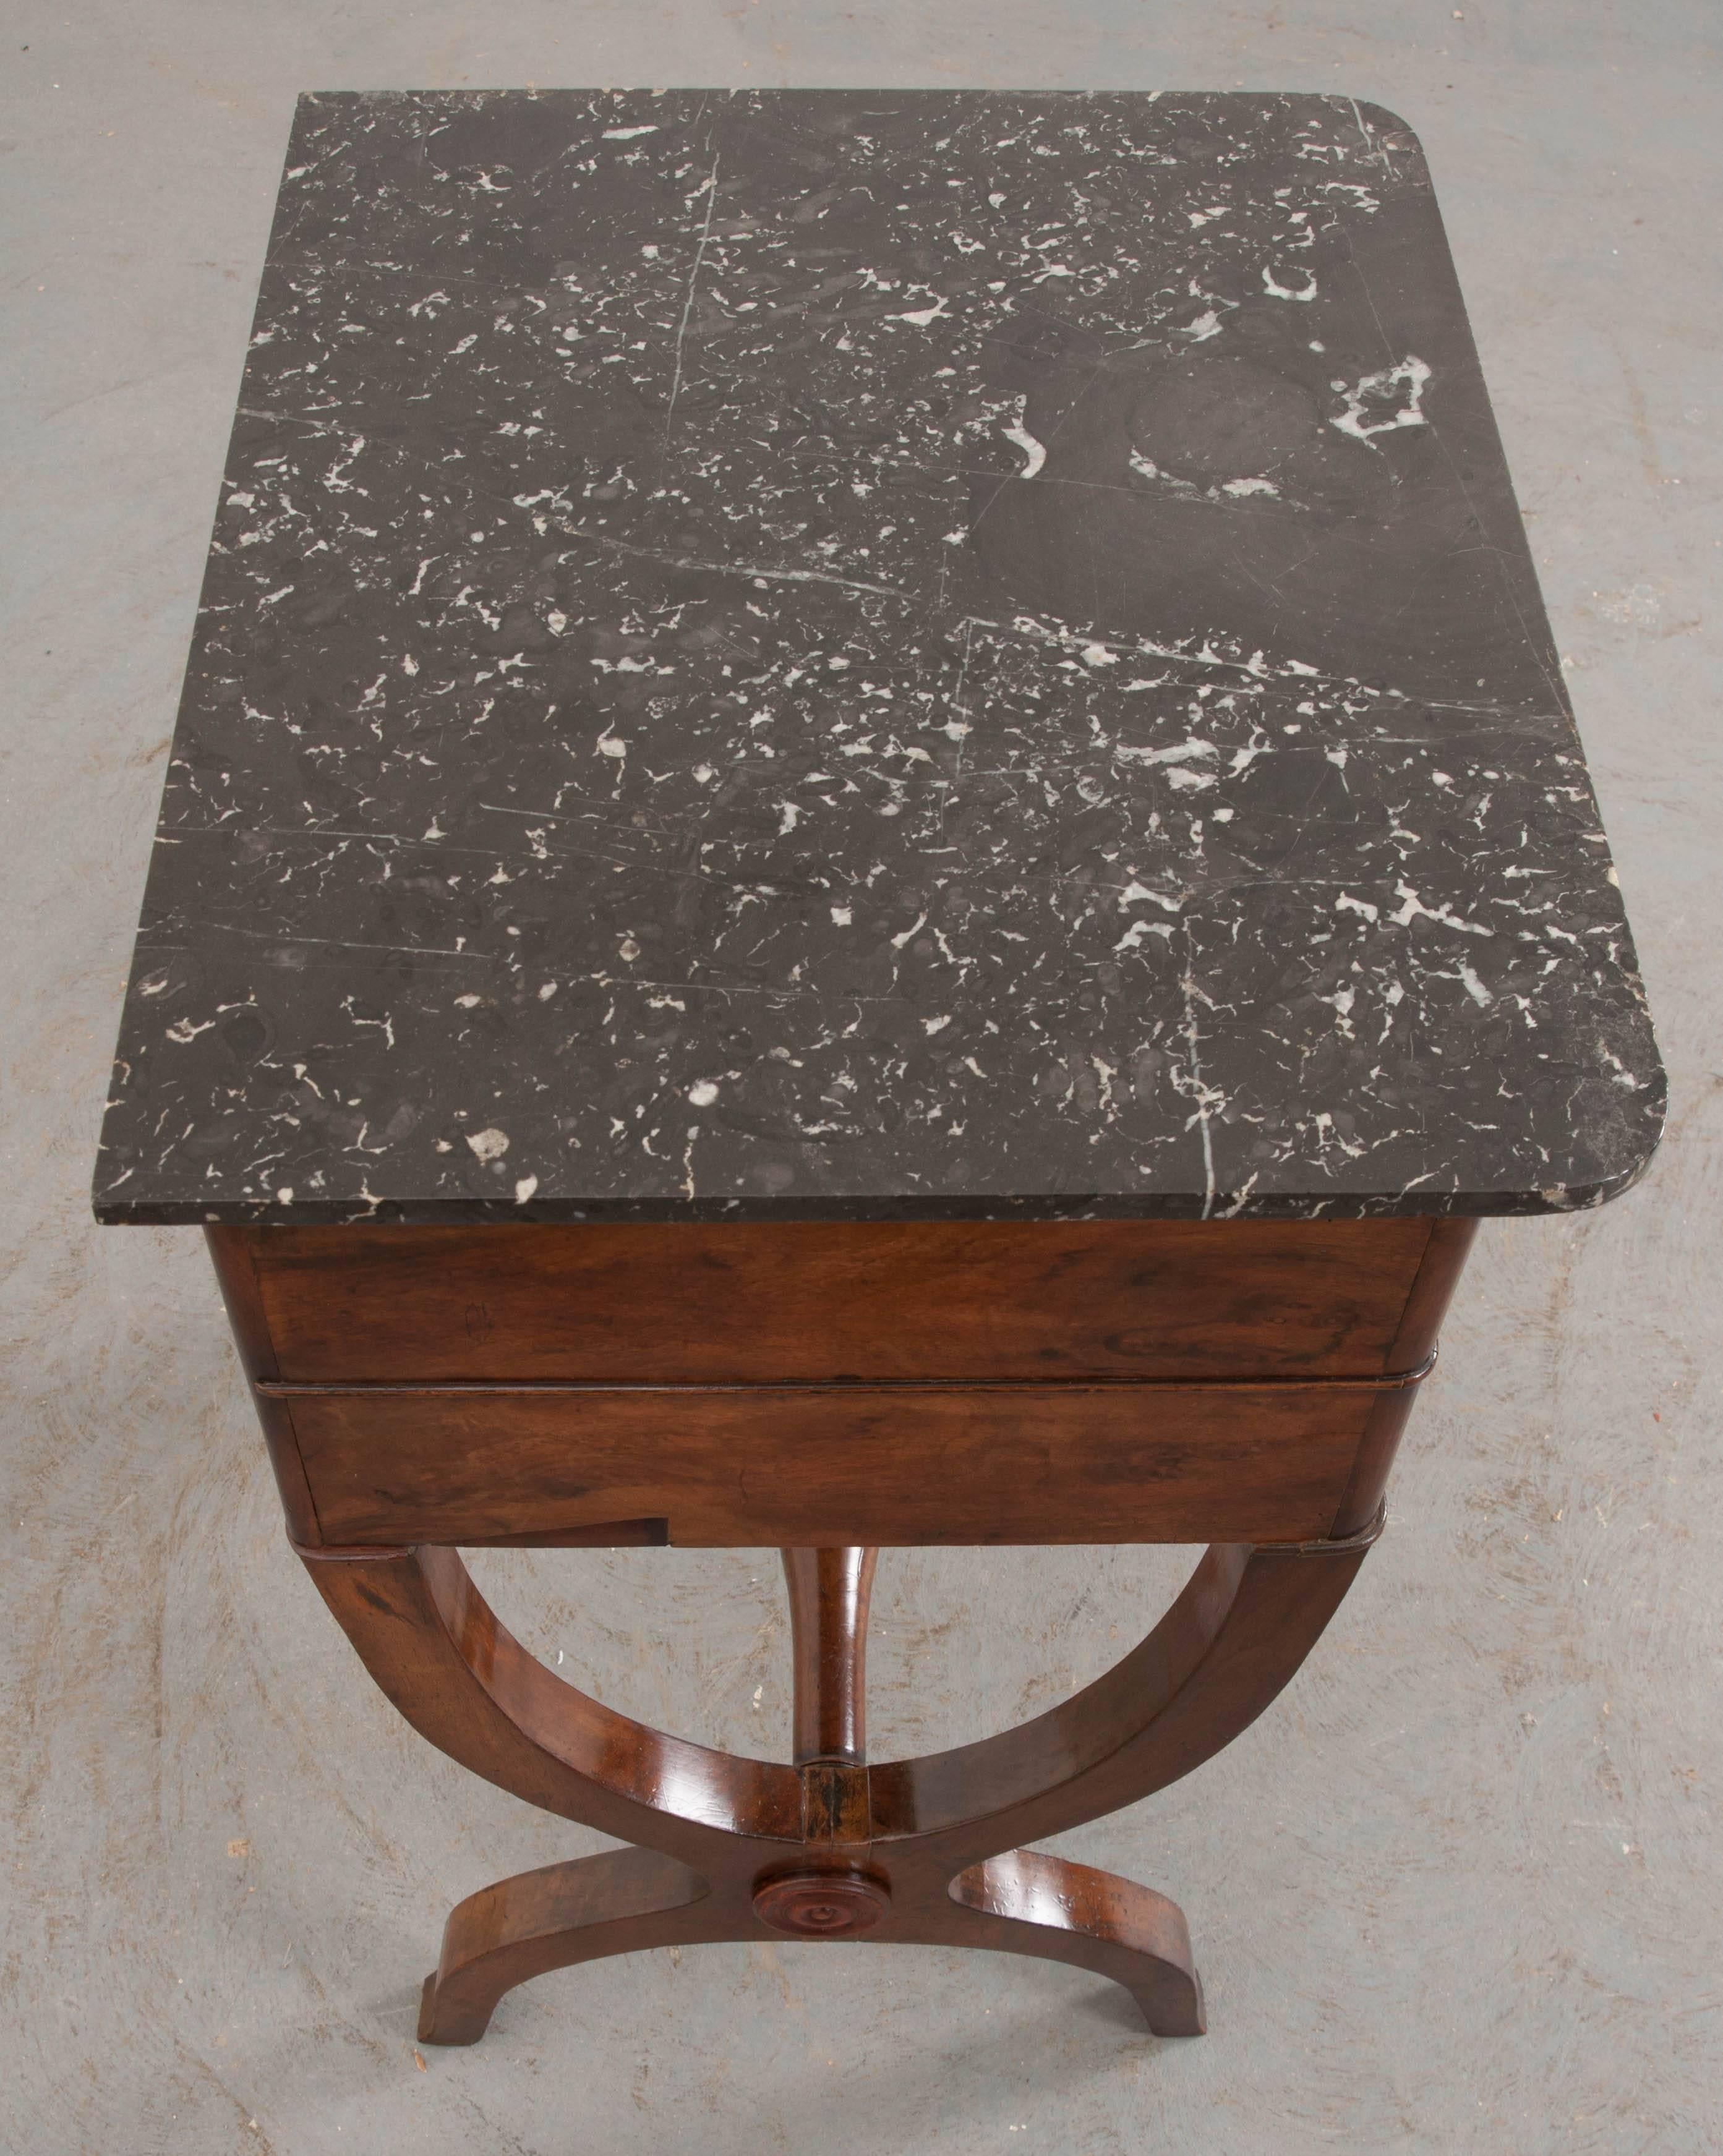 Turned French 19th Century Marble-Top Walnut Table